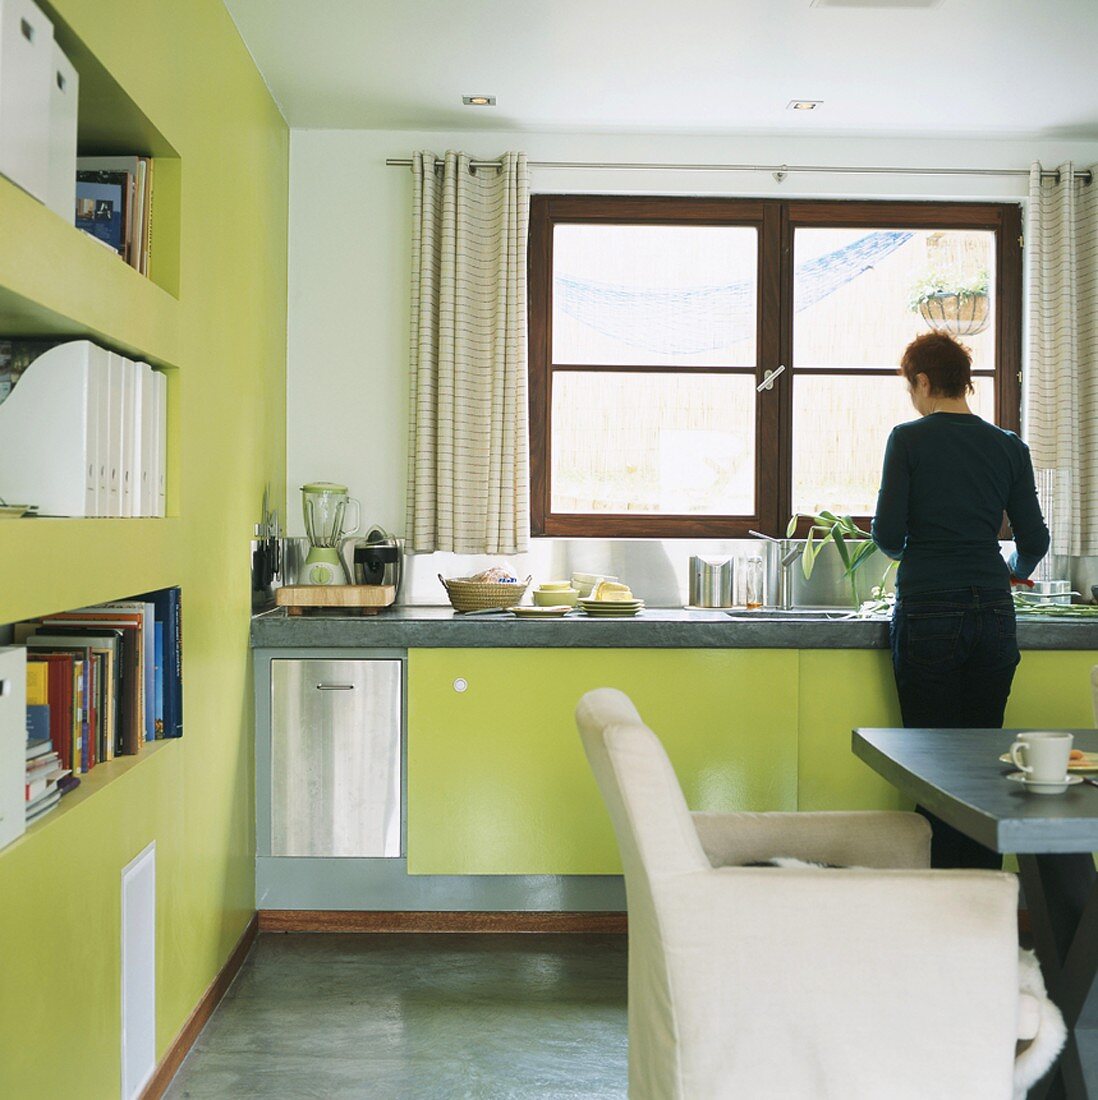 Woman washing up in kitchen with green units